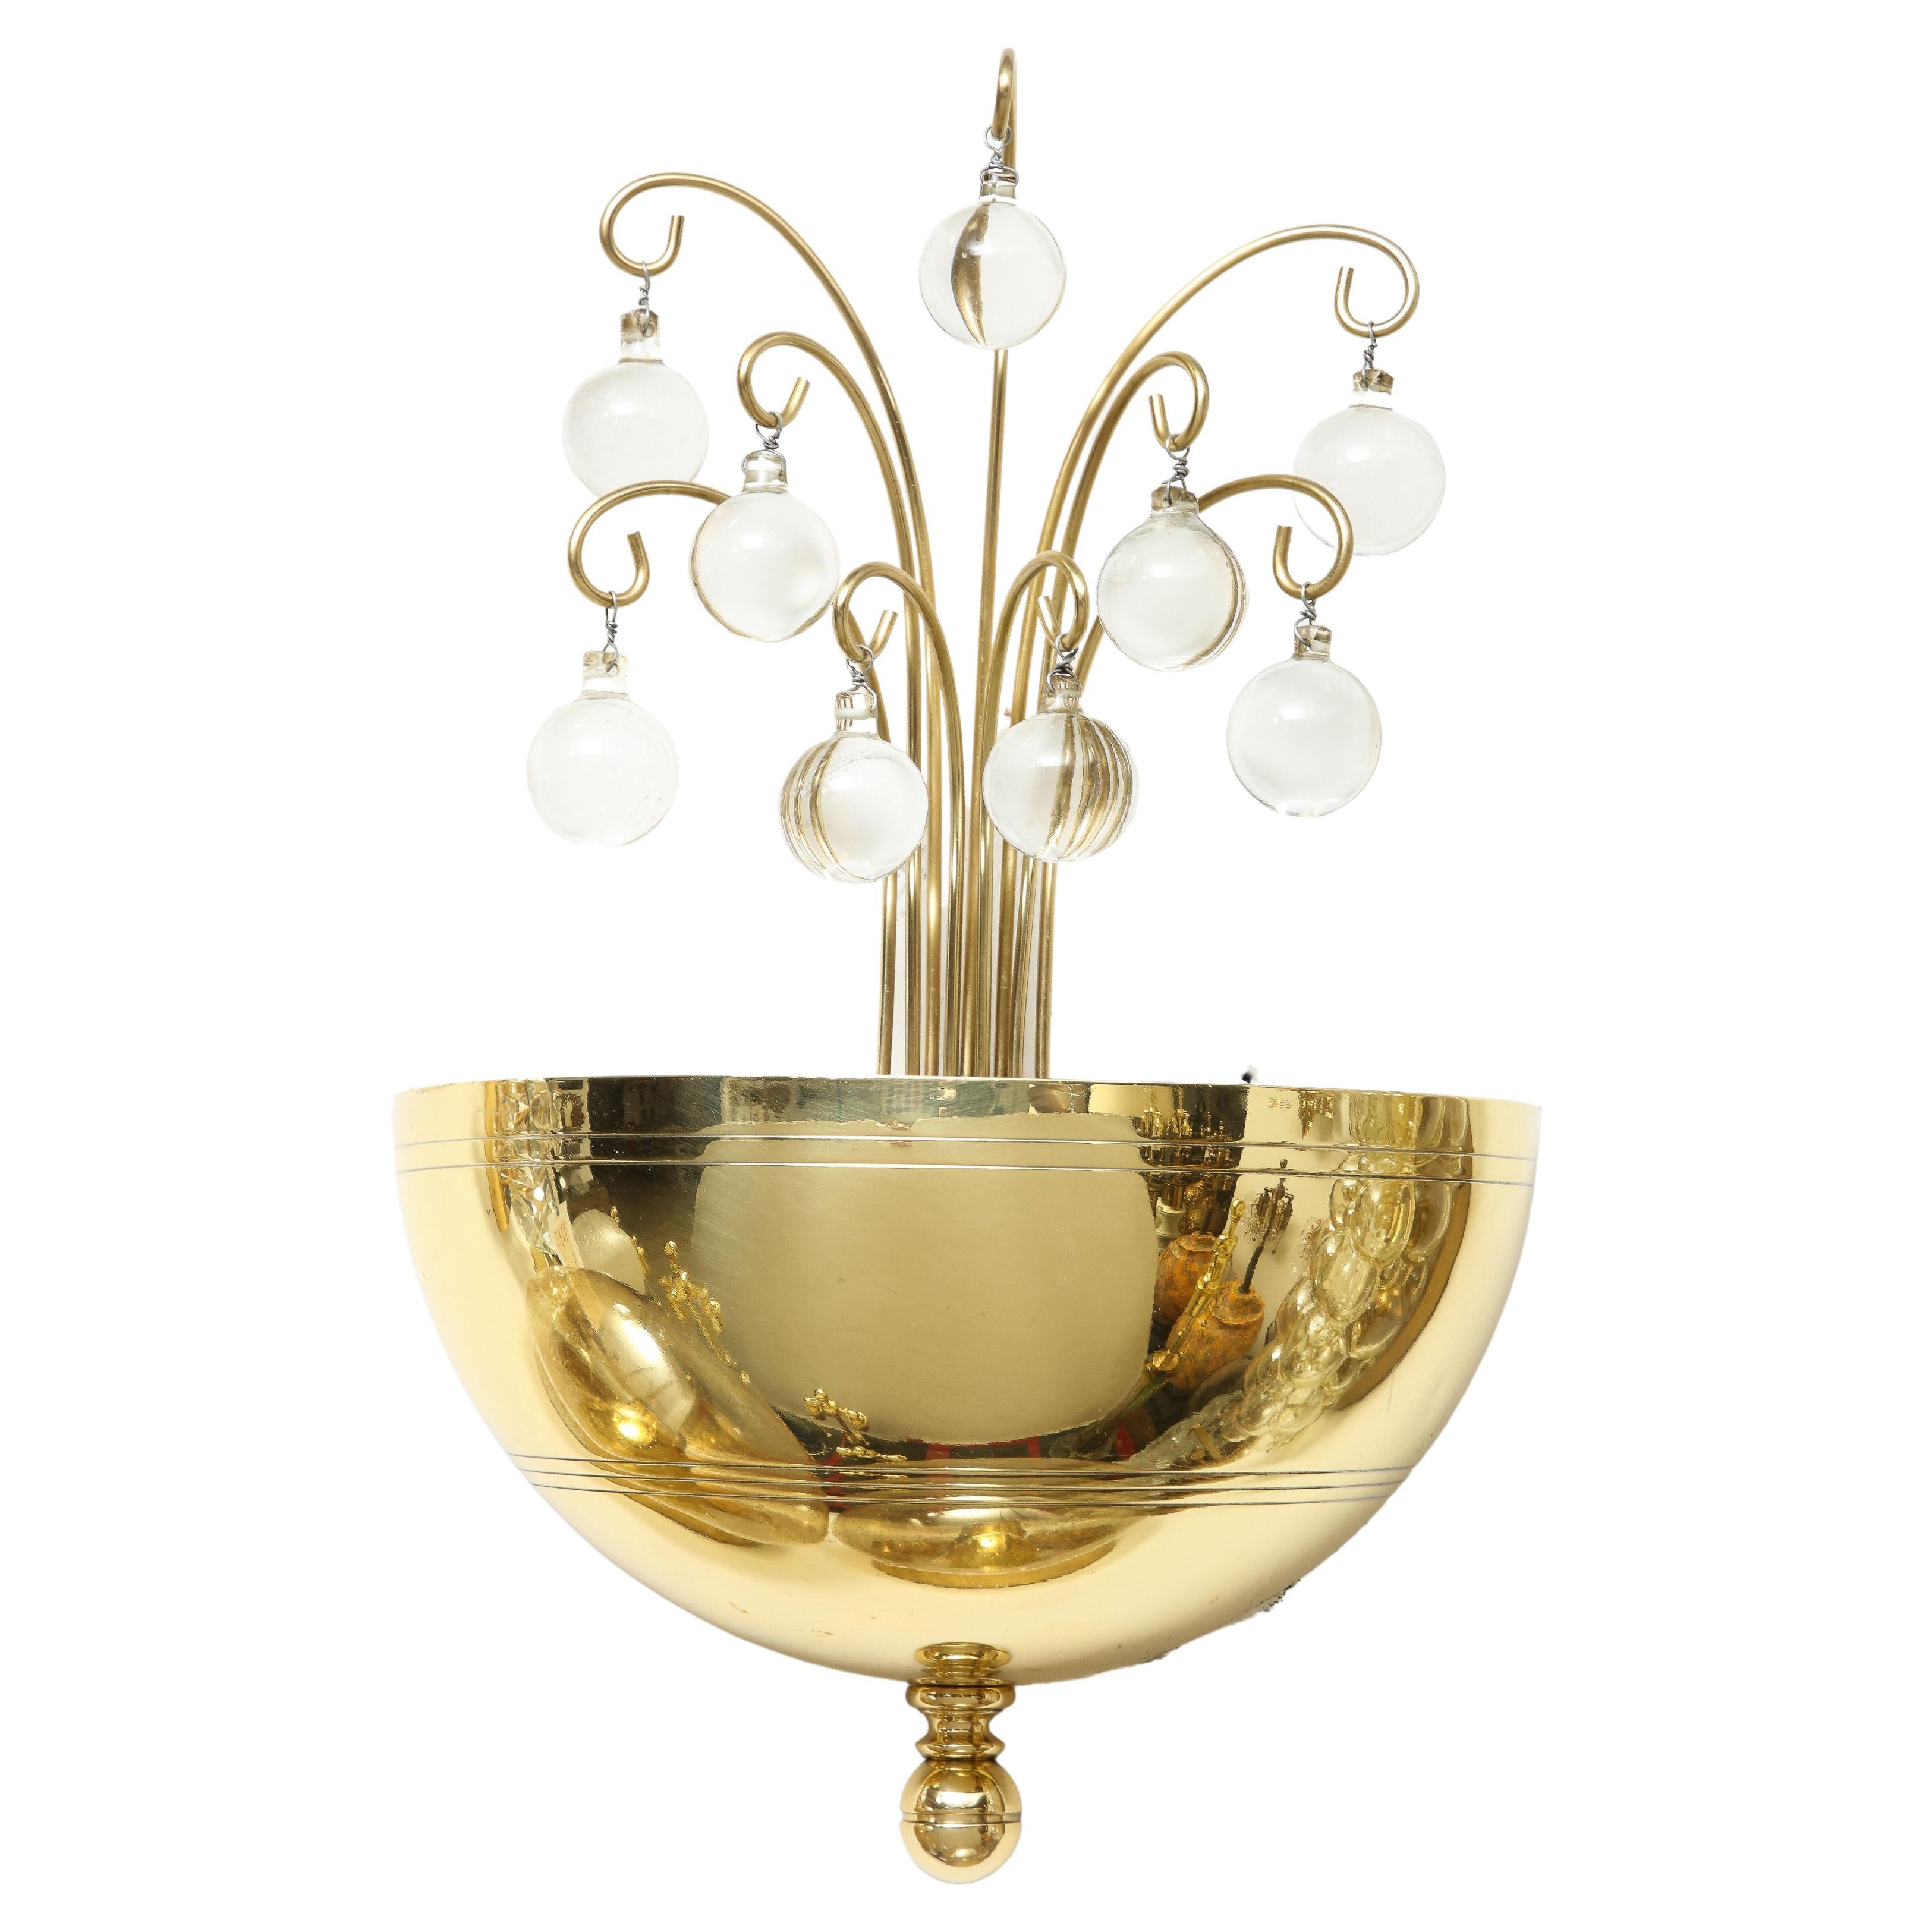 Authentic Pair of 1940's Art Deco brass and crystal ball sconces.
The Demi lune brass fixture supports a brass spray which holds the crystal balls and is illuminated by single light source which has been Newly rewired.
   